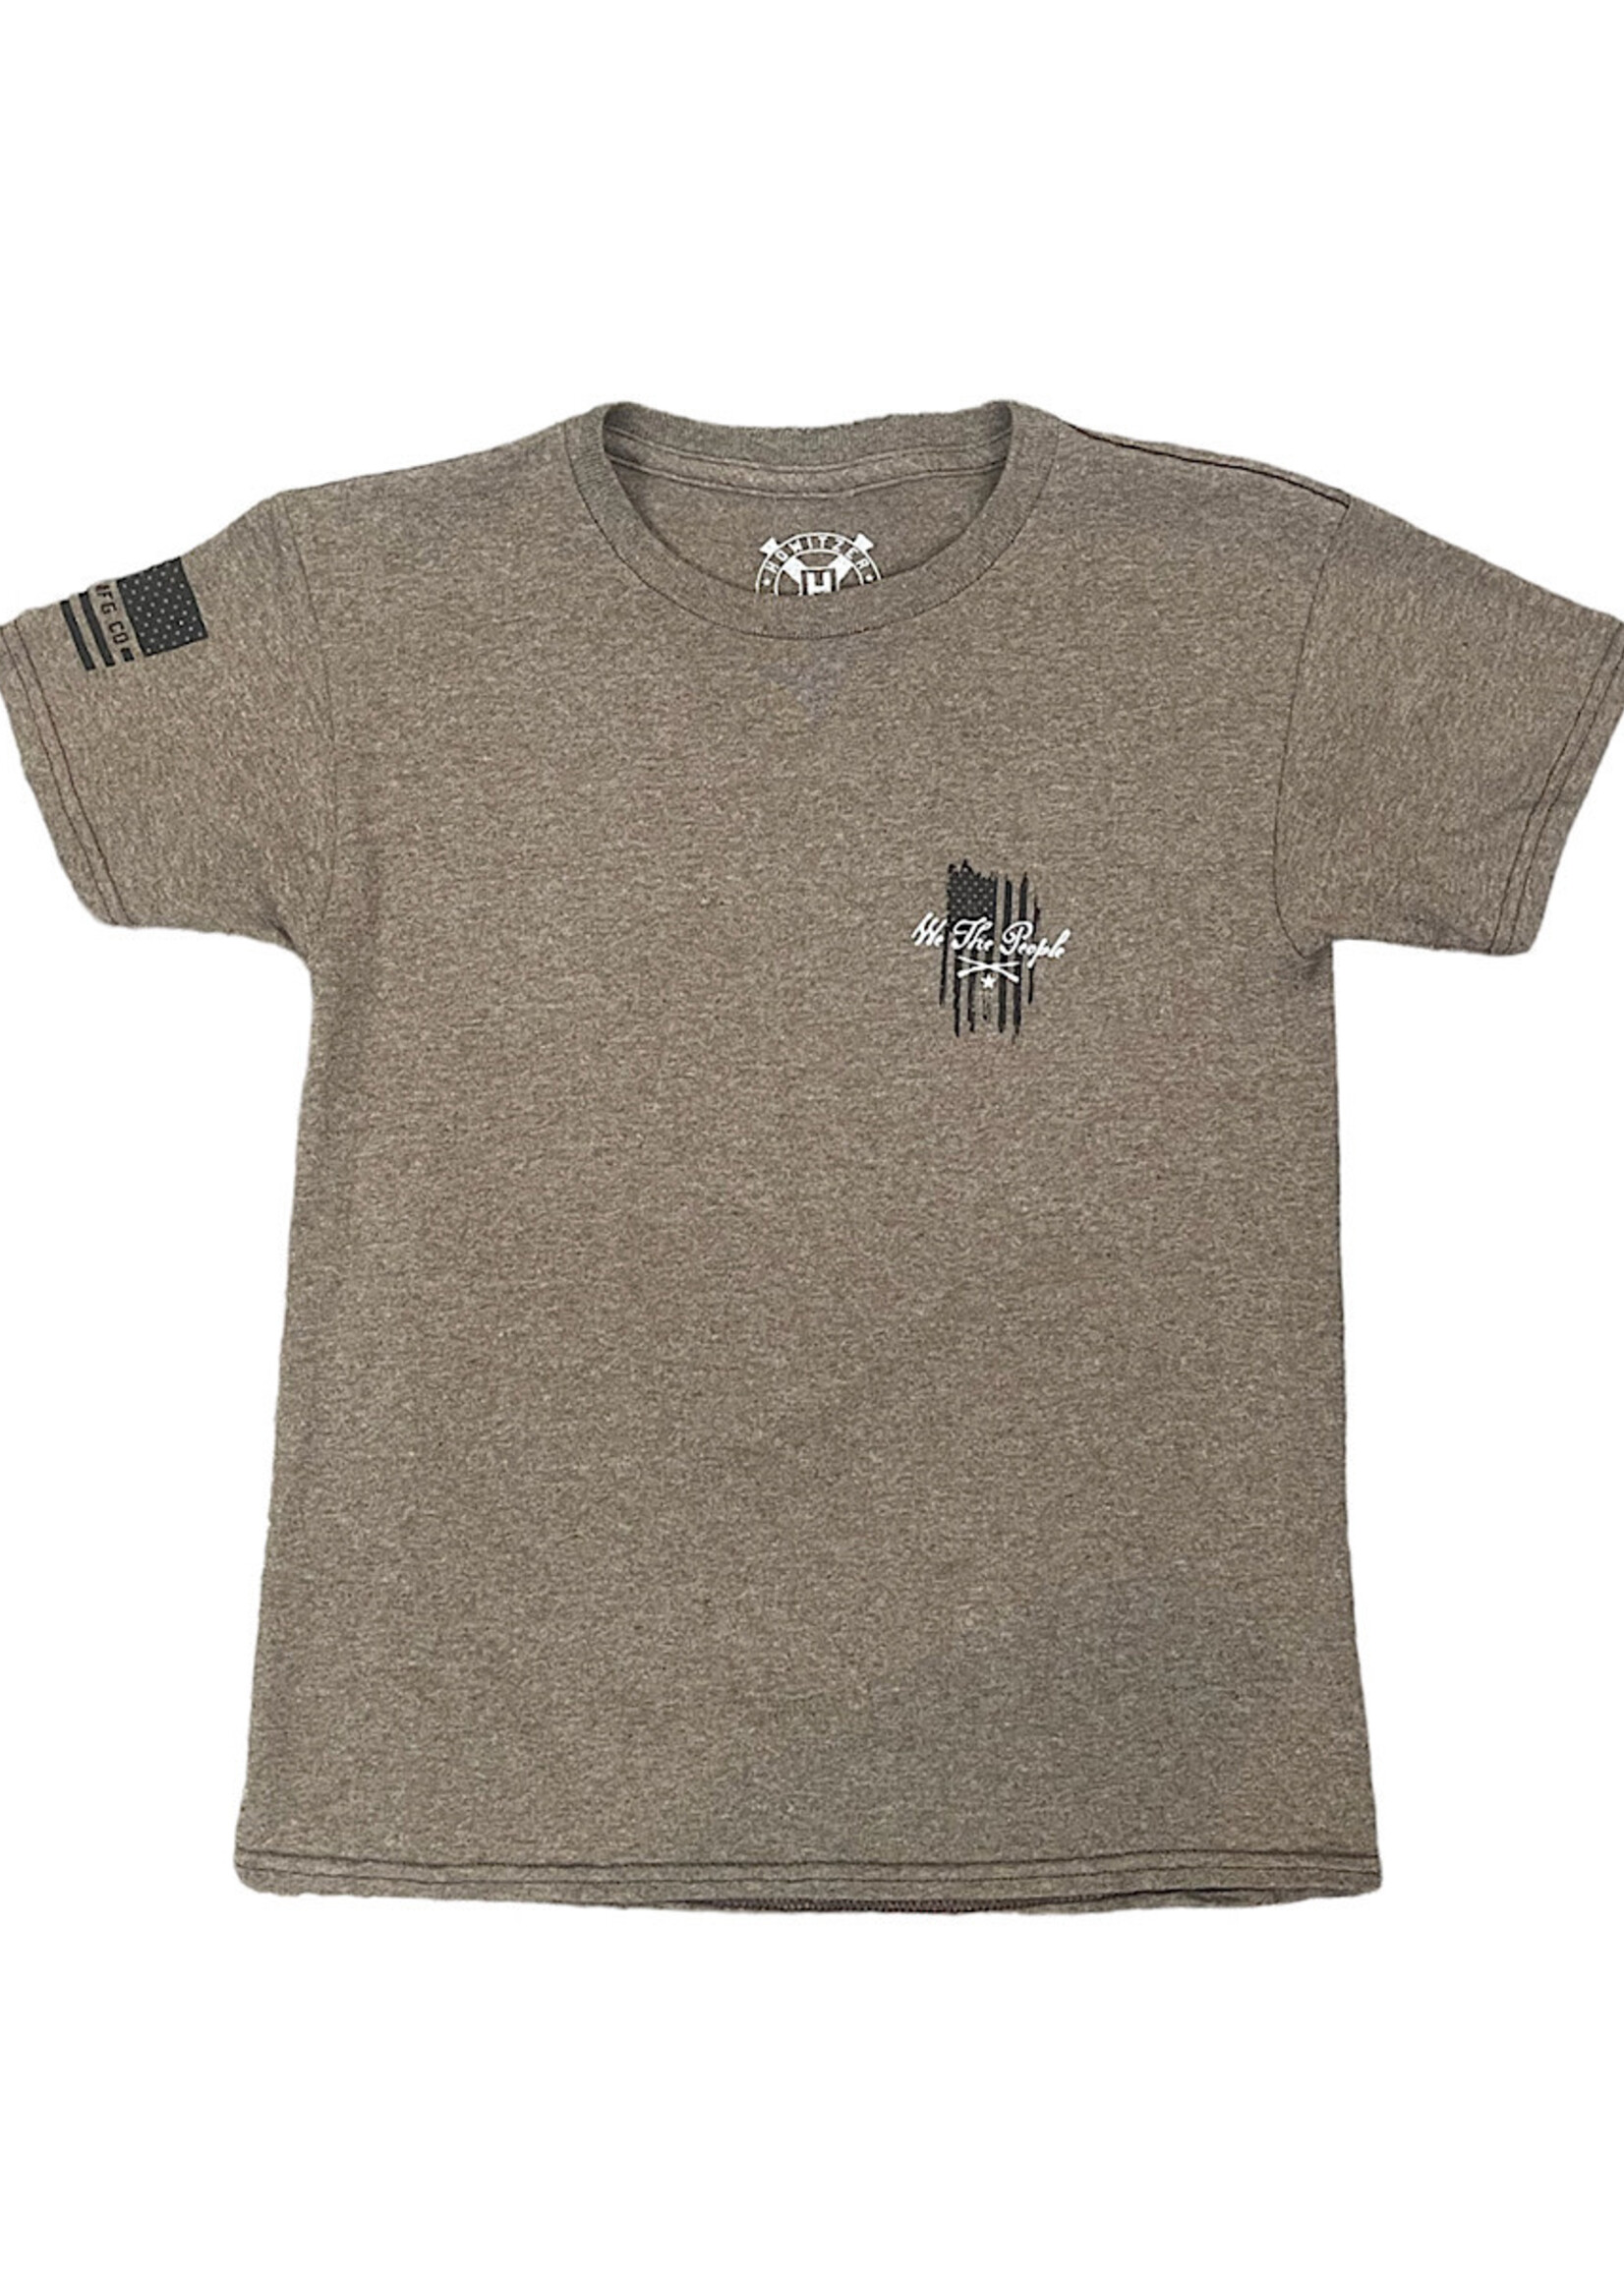 Howitzer Youth Blessings Of Liberty S/S Tee -Y- Brown Heather